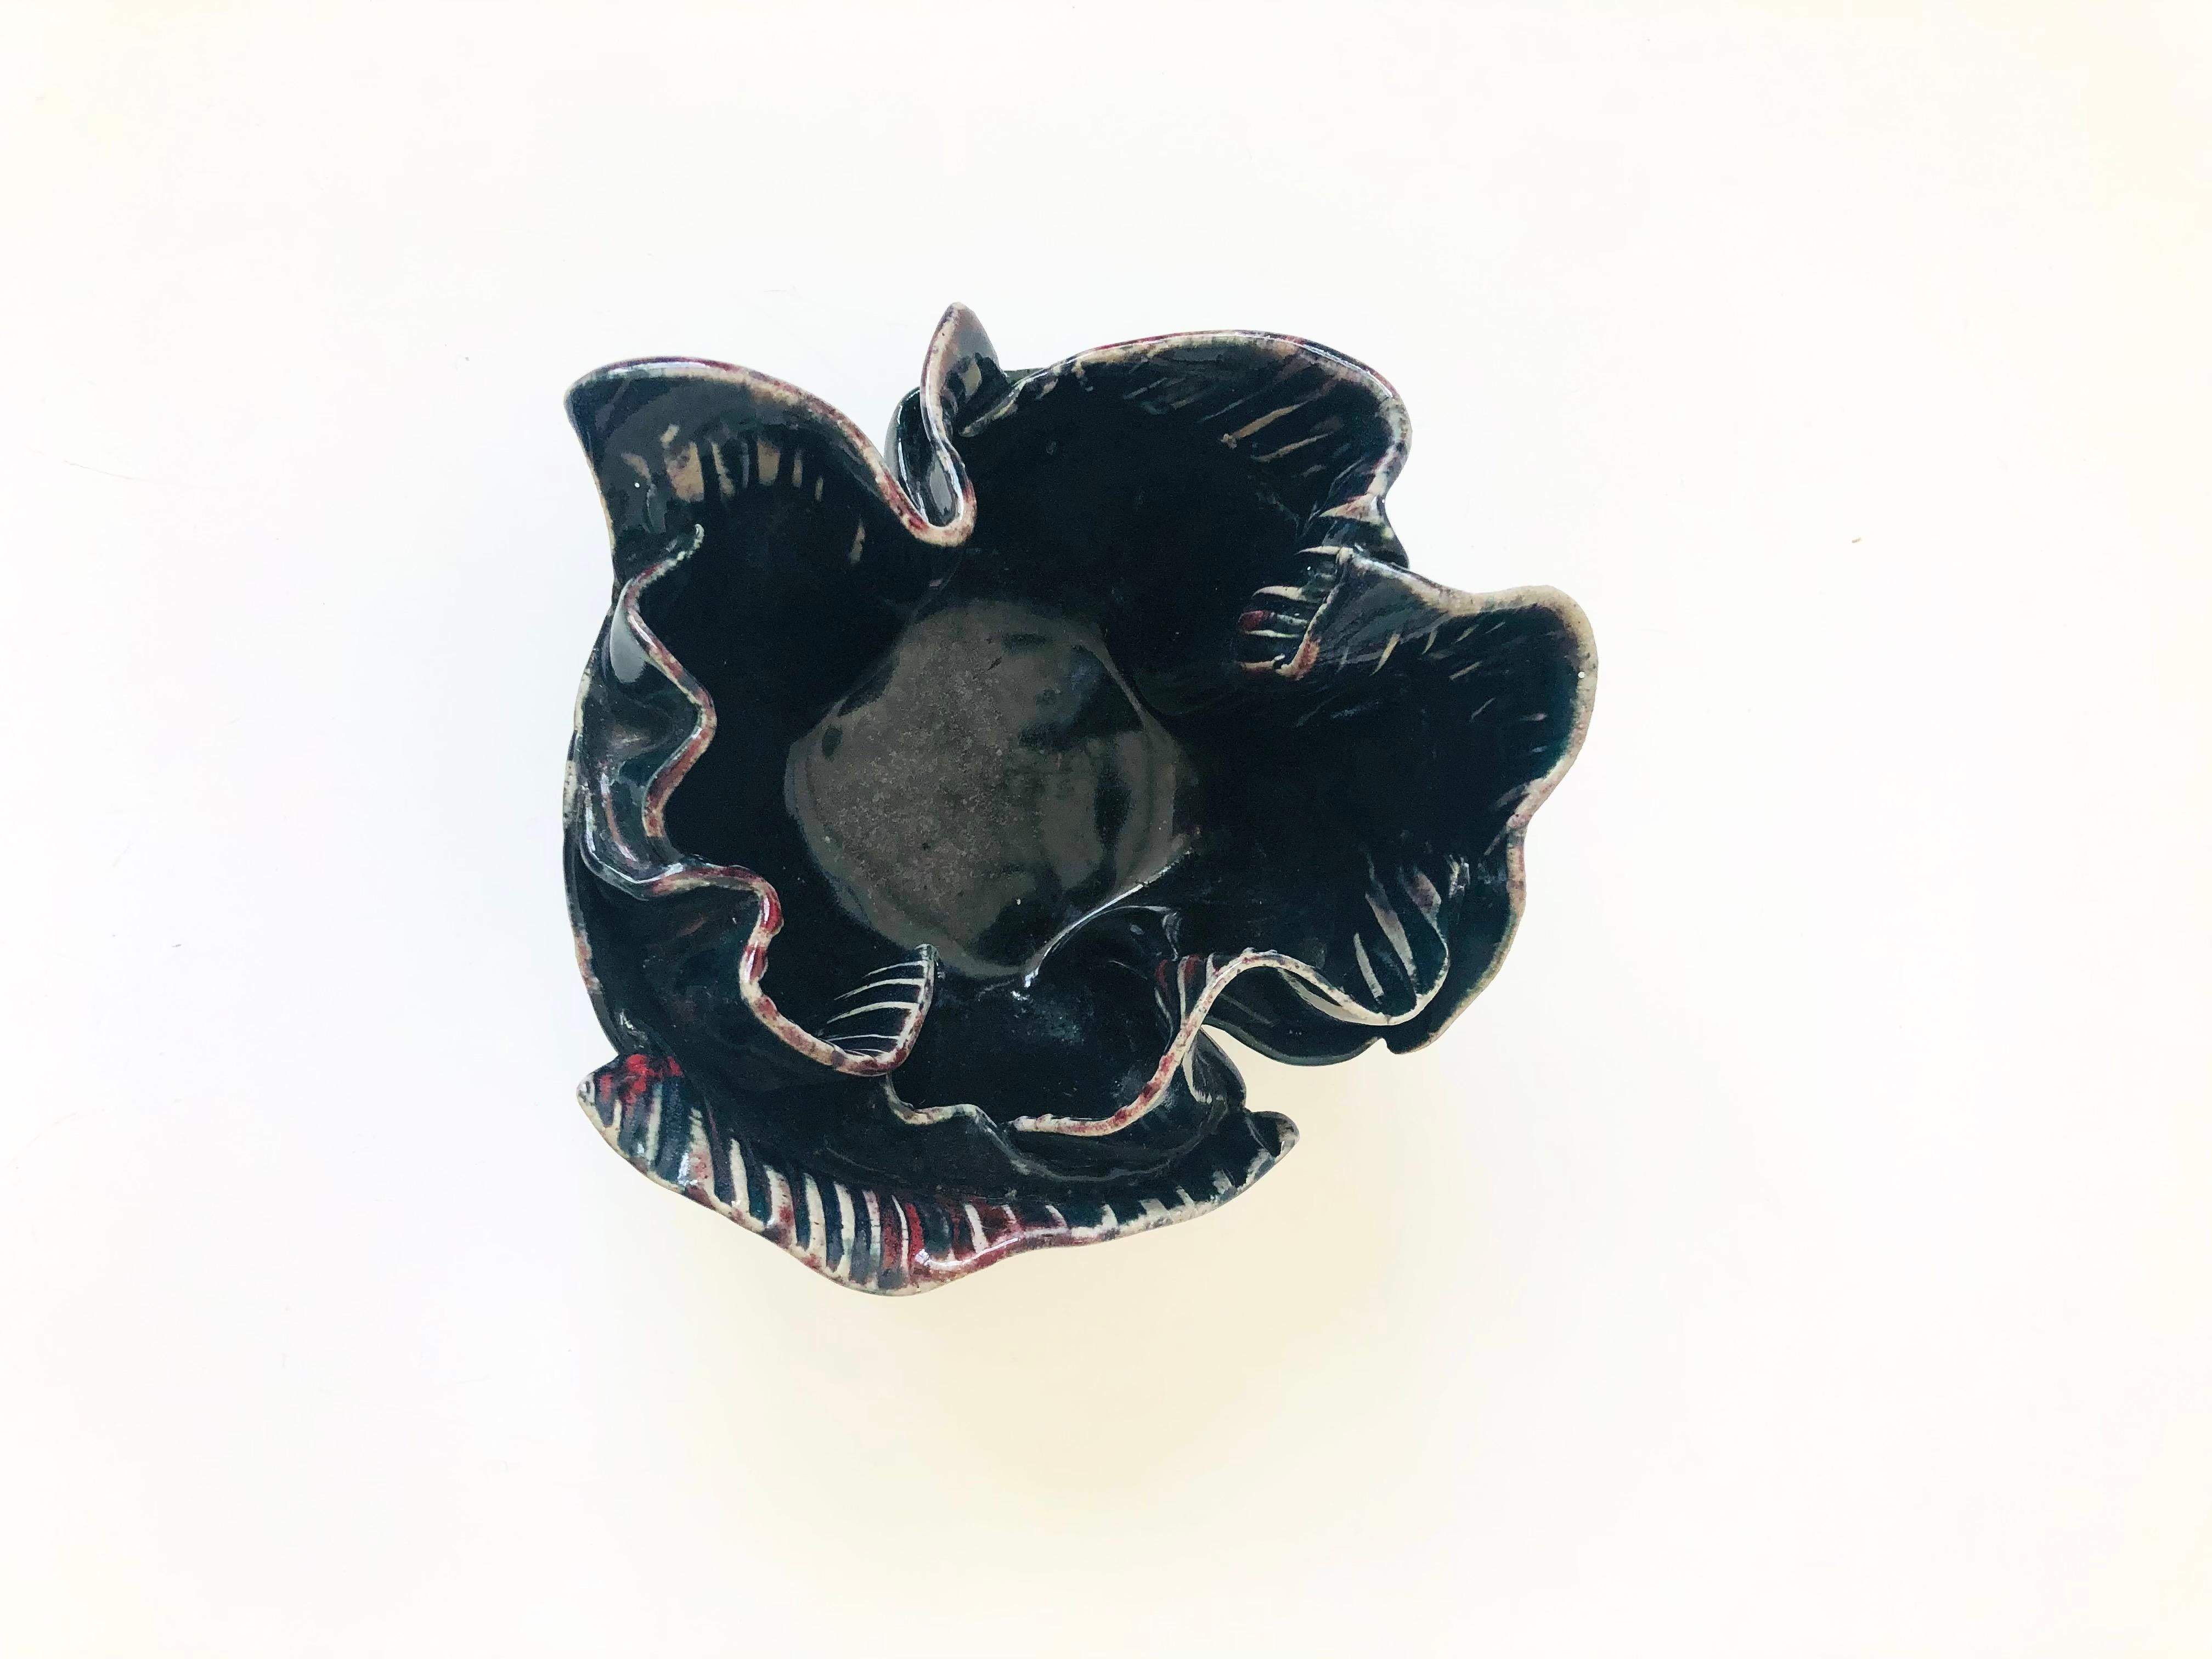 A beautiful vintage studio pottery bowl in the shape of a flower. Lovely detailing formed into the pottery to create the petals. Finished in a glossy dark glaze. Signed by the artist, Olga, on the base.
  